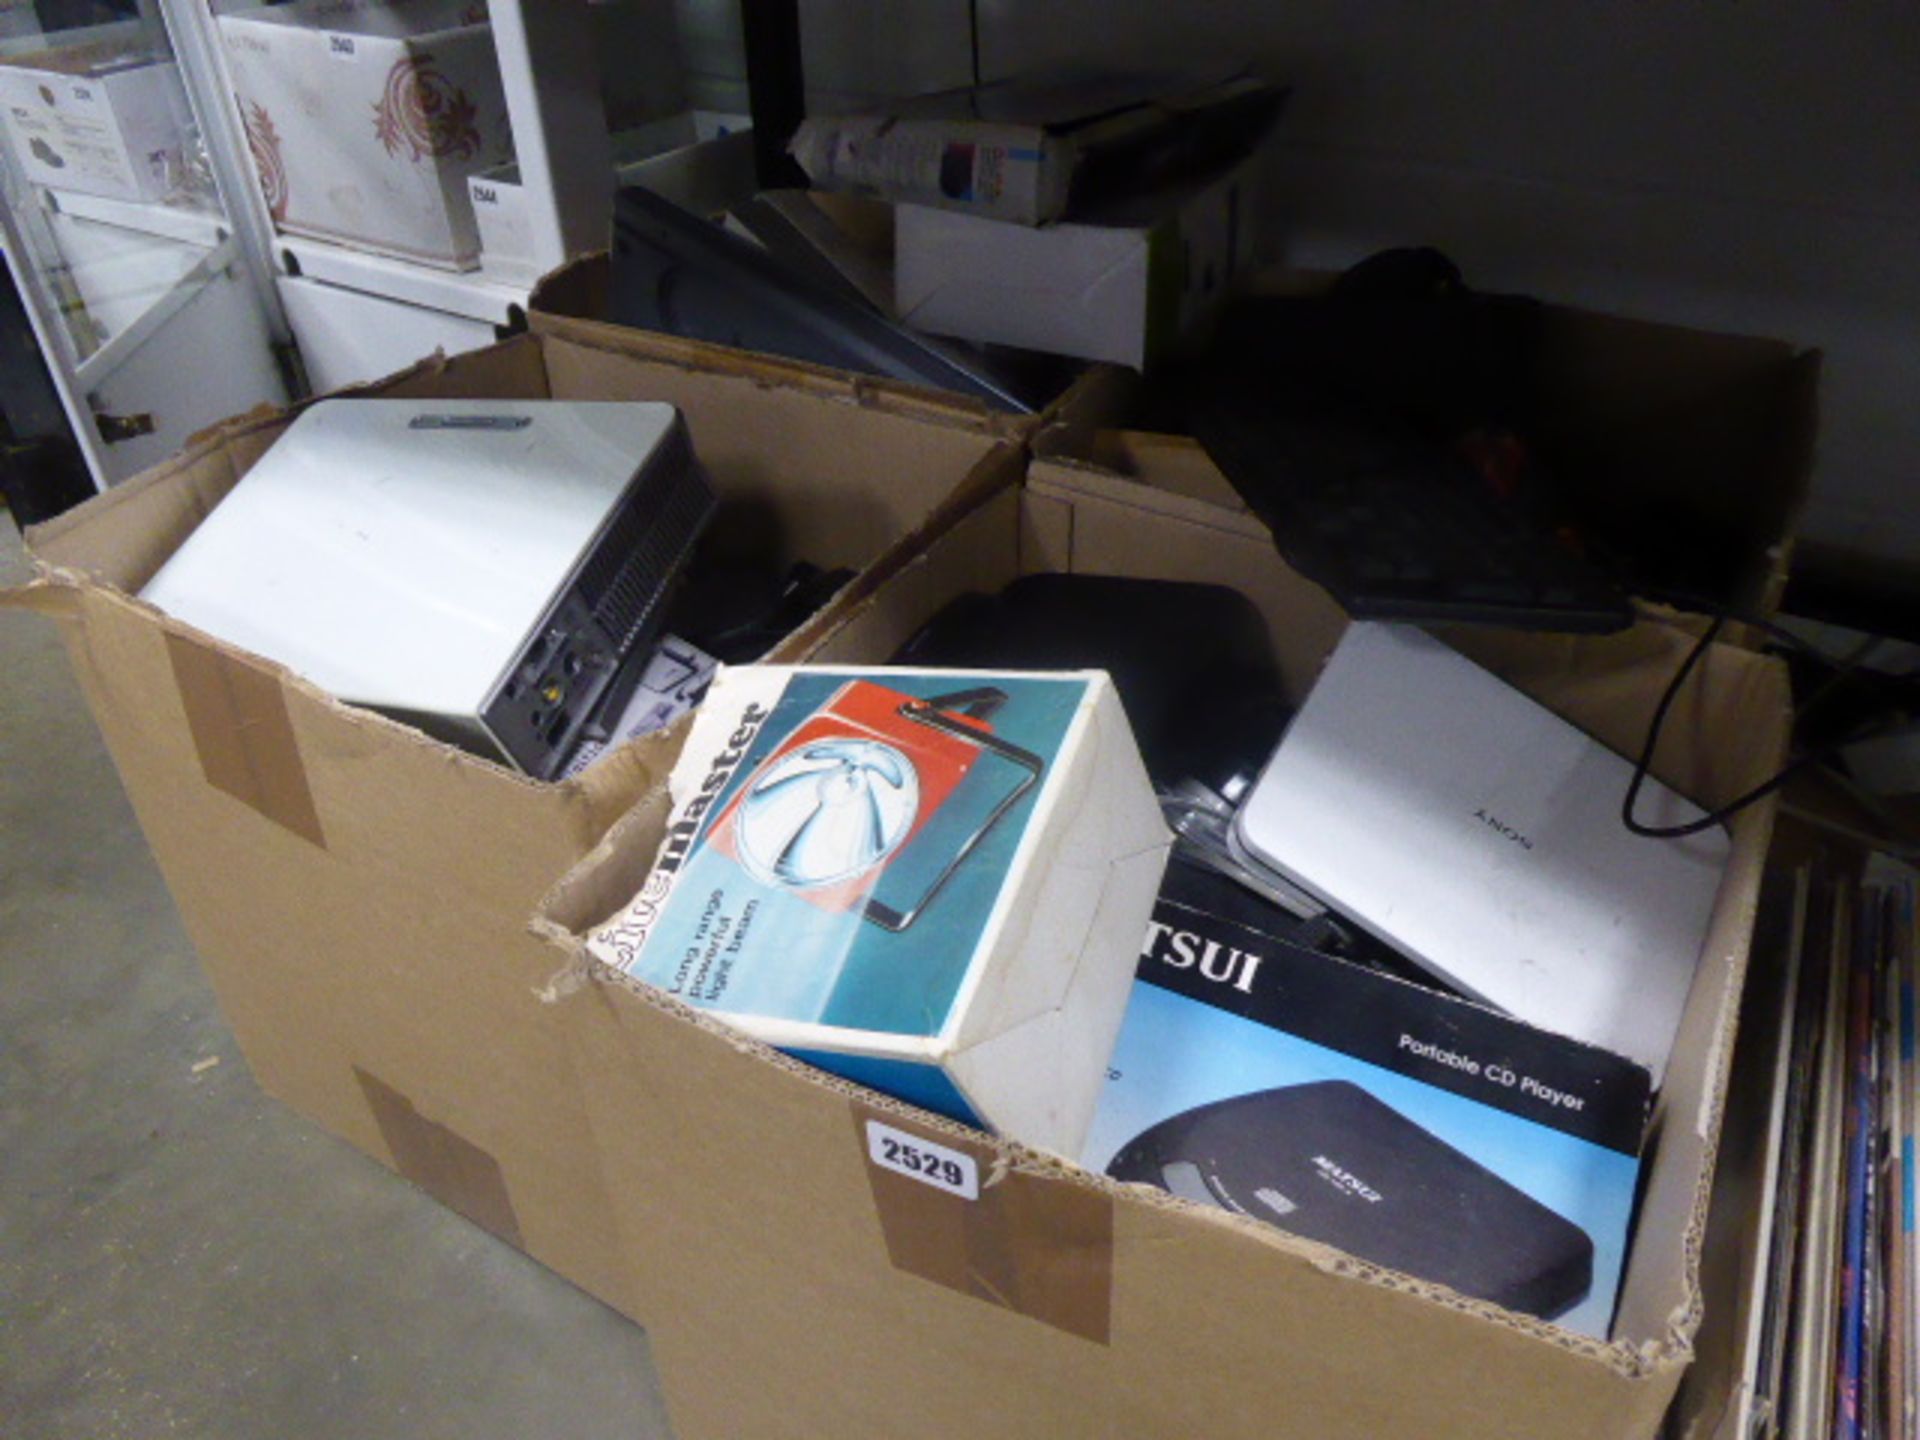 5 boxes containing electrical items including projector, portable DVD player, speaker, keyboards,